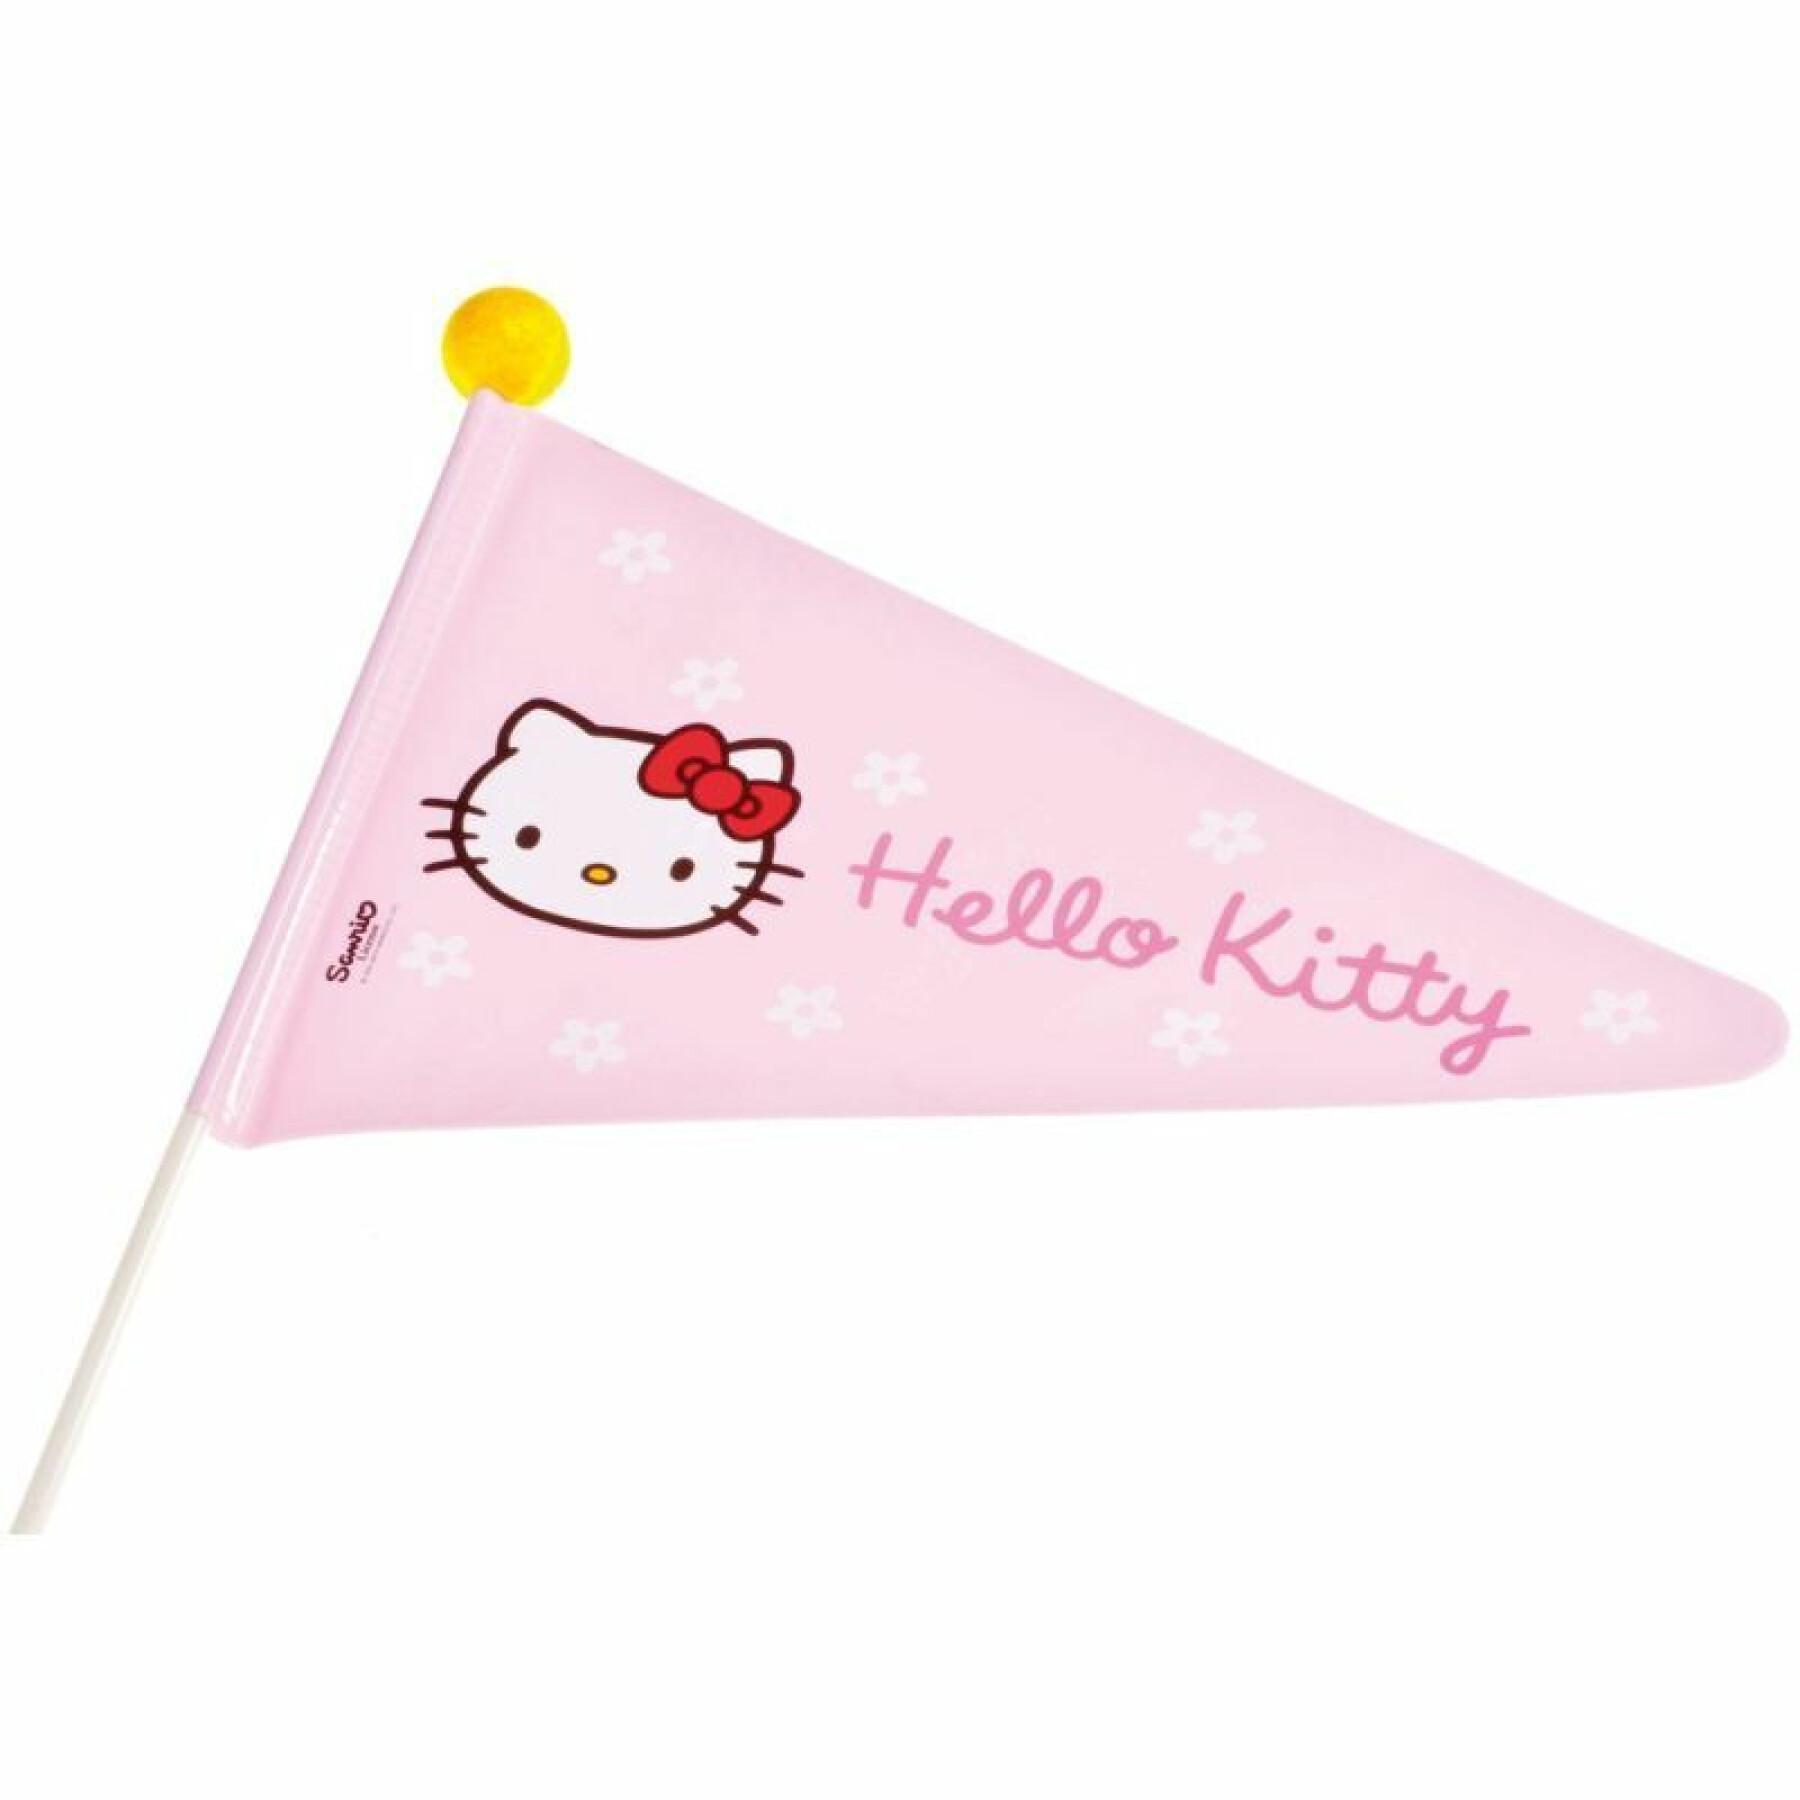 Double layer safety pennant, in several parts Bike Fashion Hello kitty